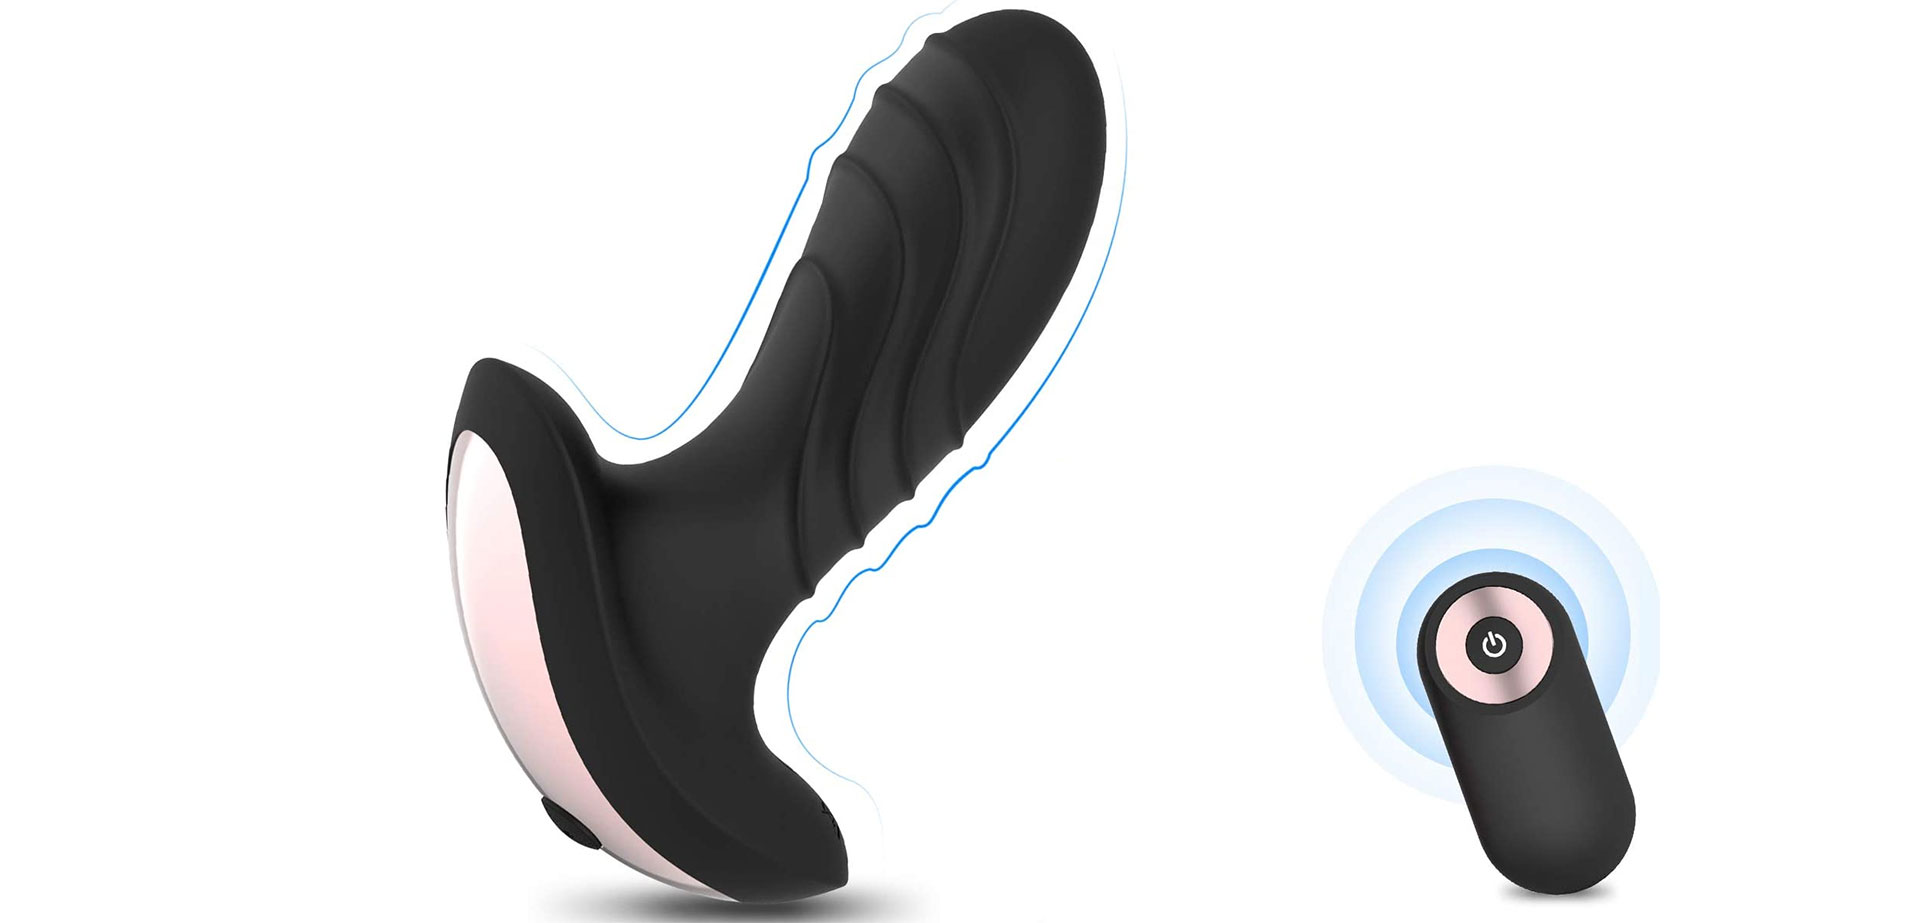 Silicone anal vibrator with 10 strong stimulation patterns.